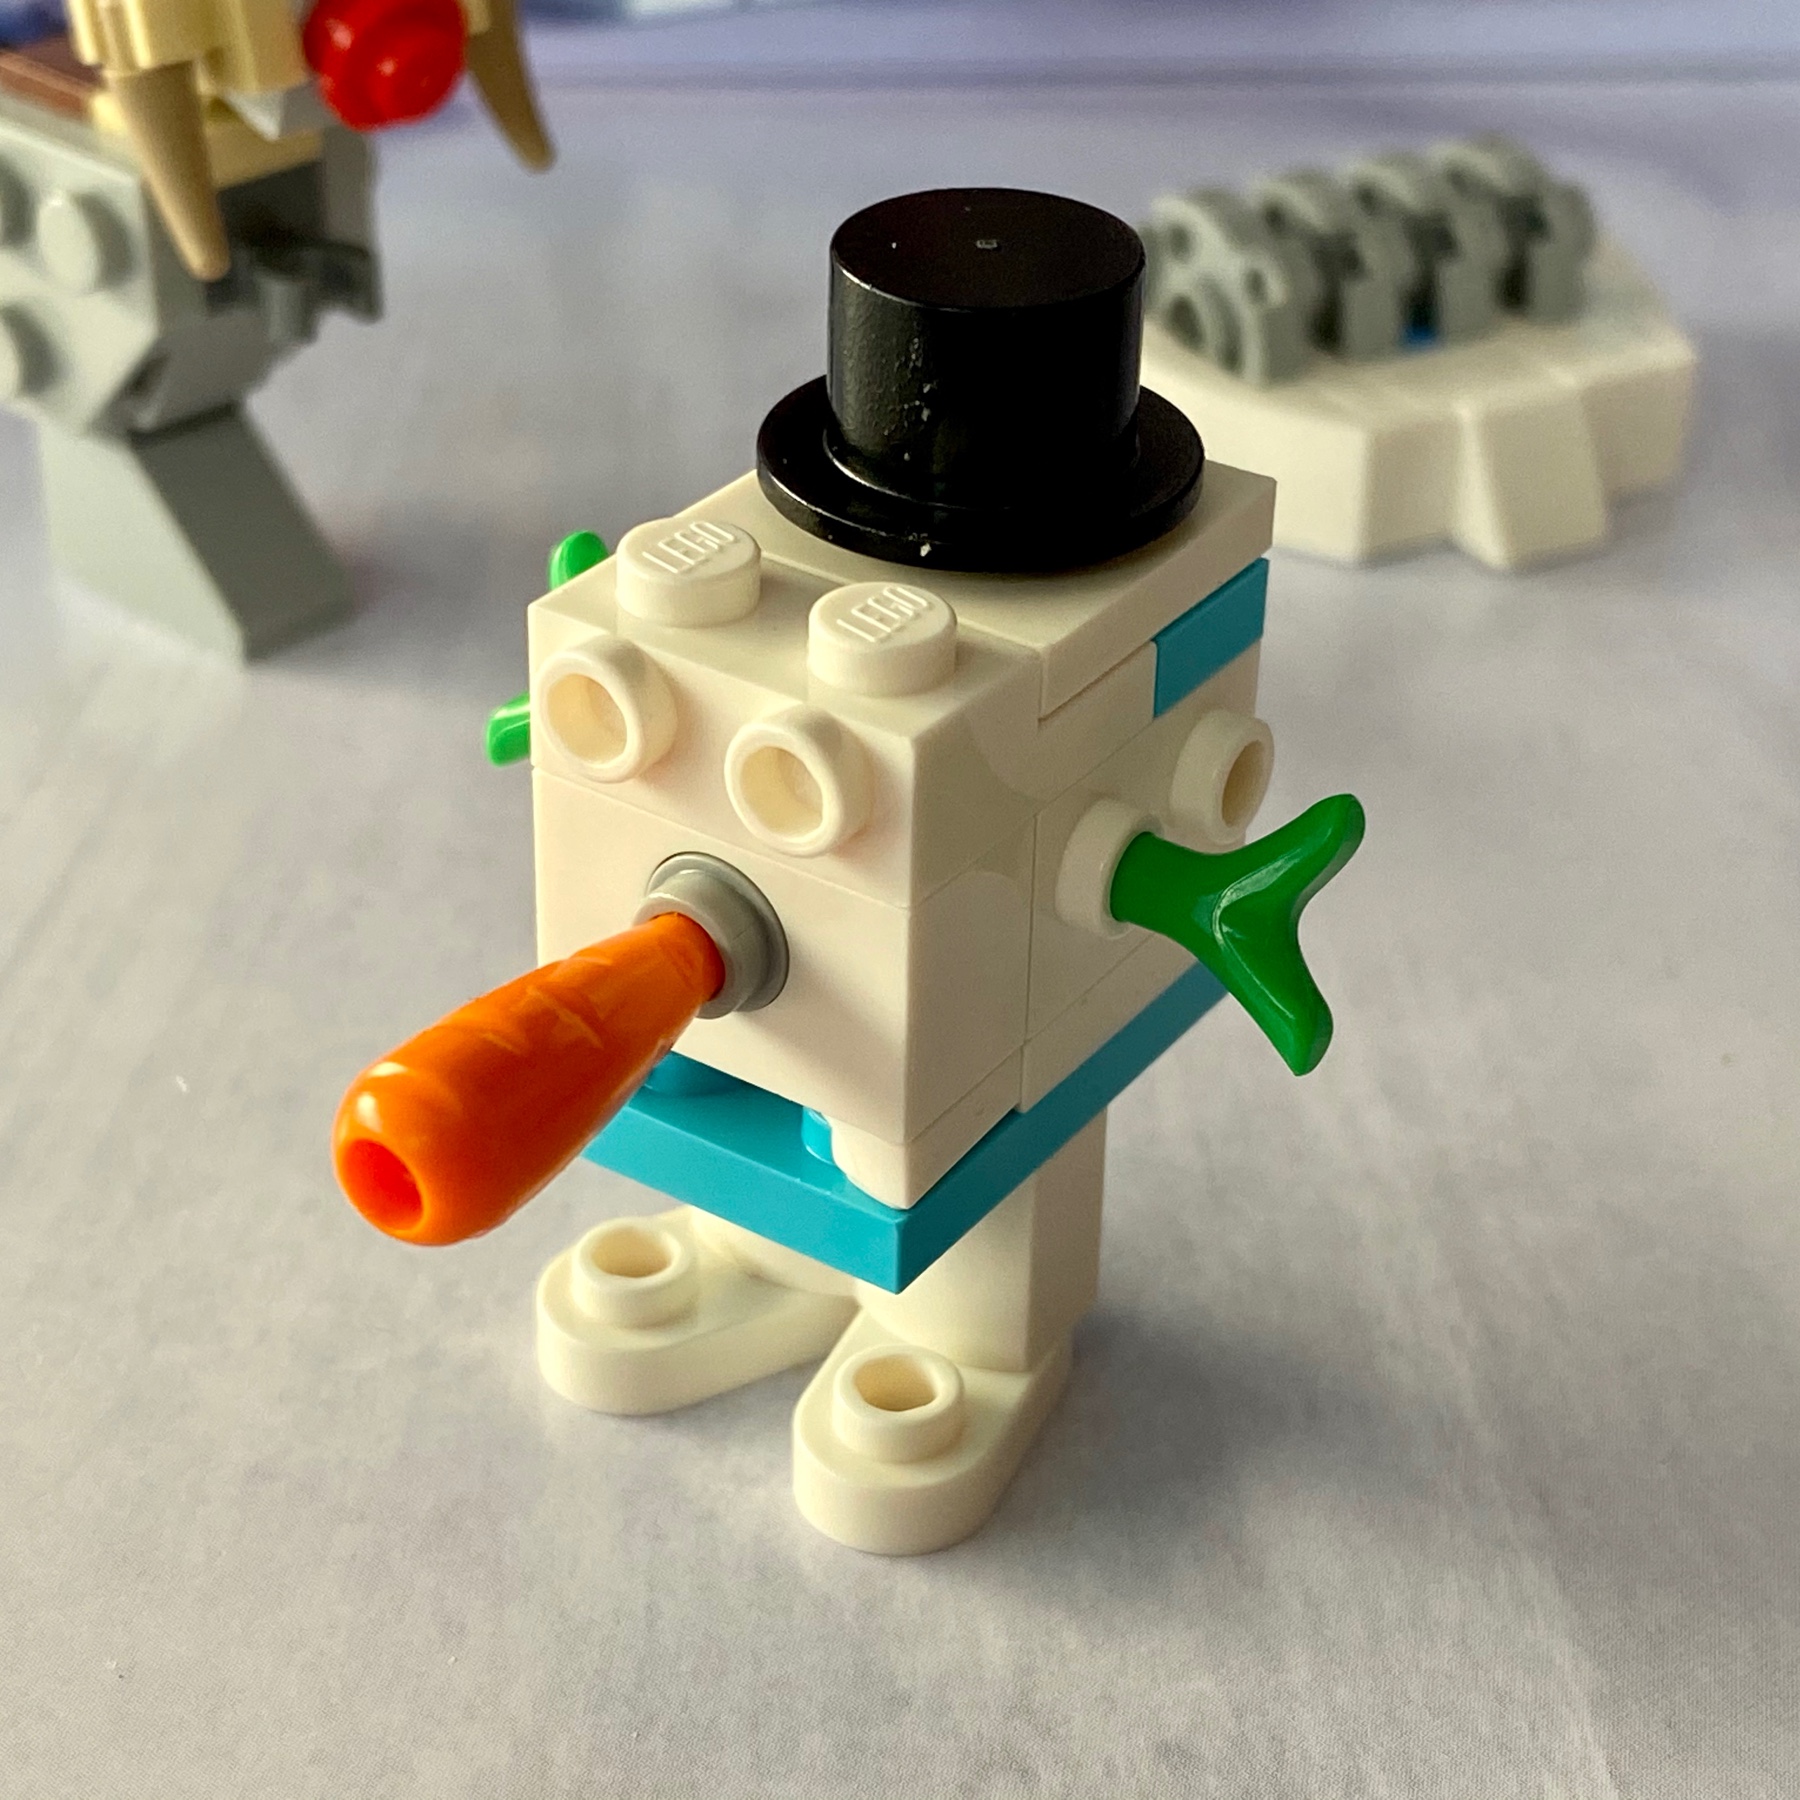 LEGO micro-build of a white Star Wars GONK droid dressed as a snowman with green sprout arms, orange carrot nose, and a black top hat.